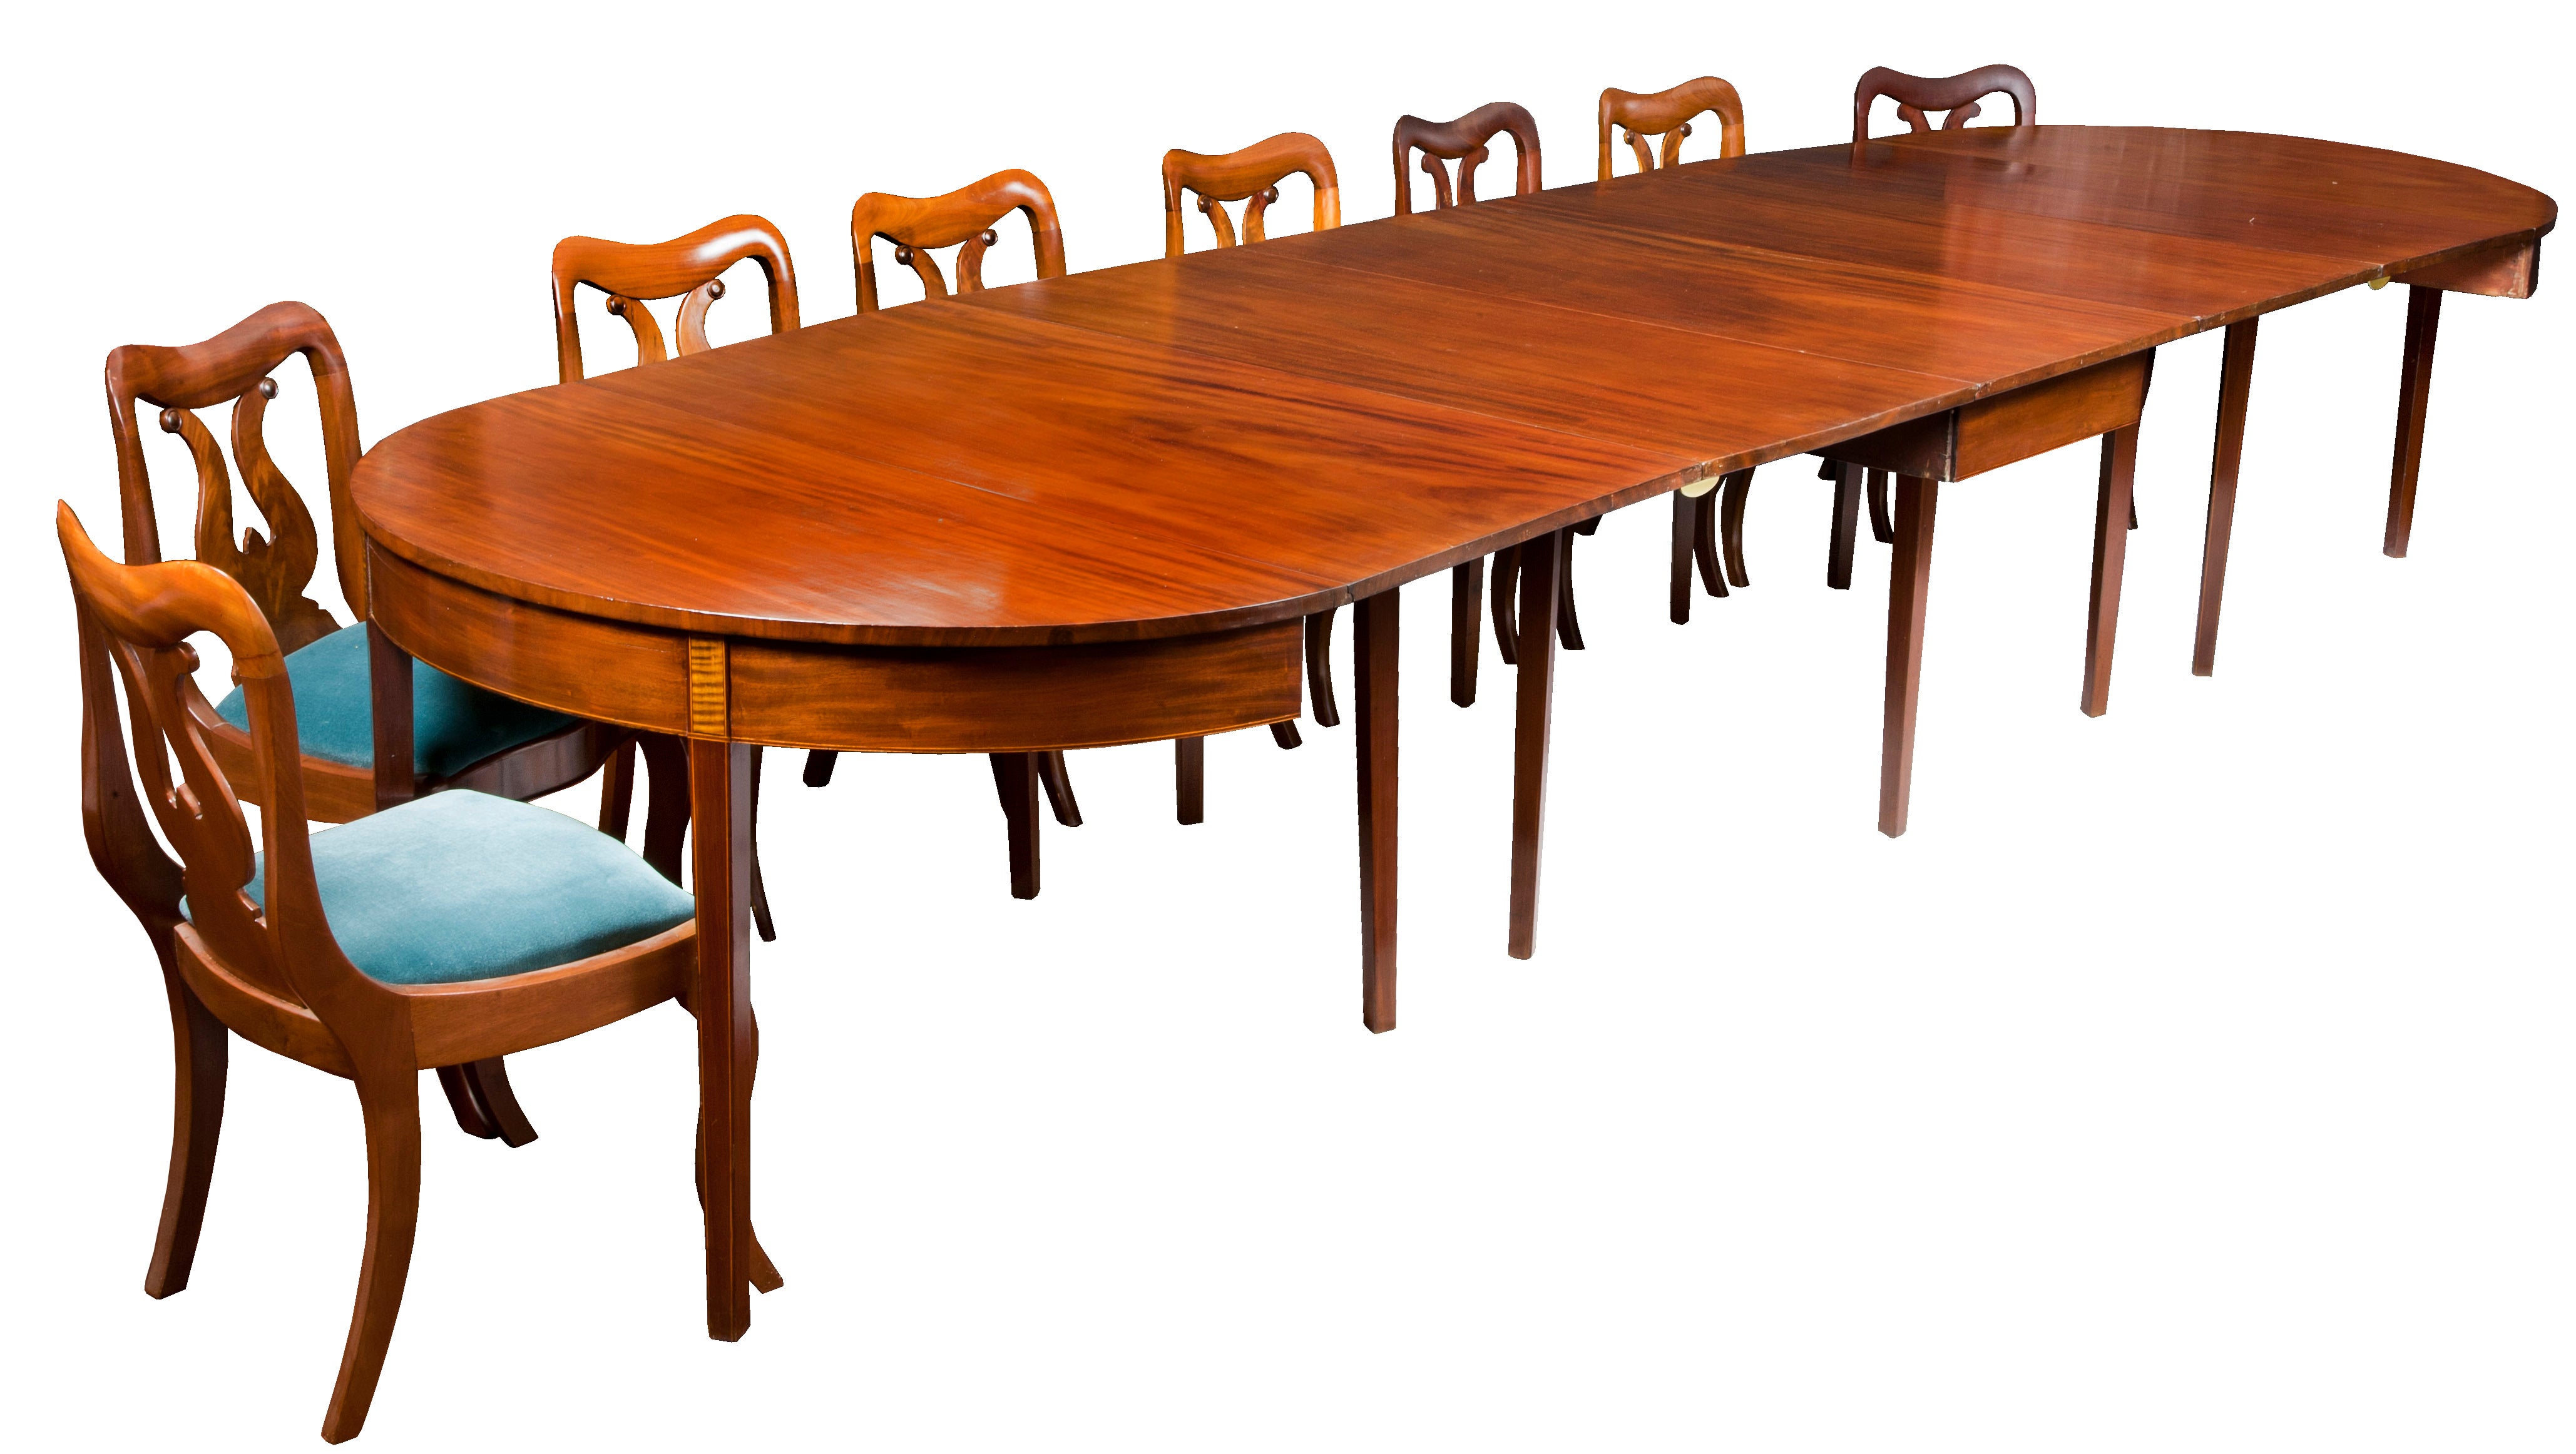 Federal Mahogany Hepplewhite Three-Part Banquet Dining Table, Southern